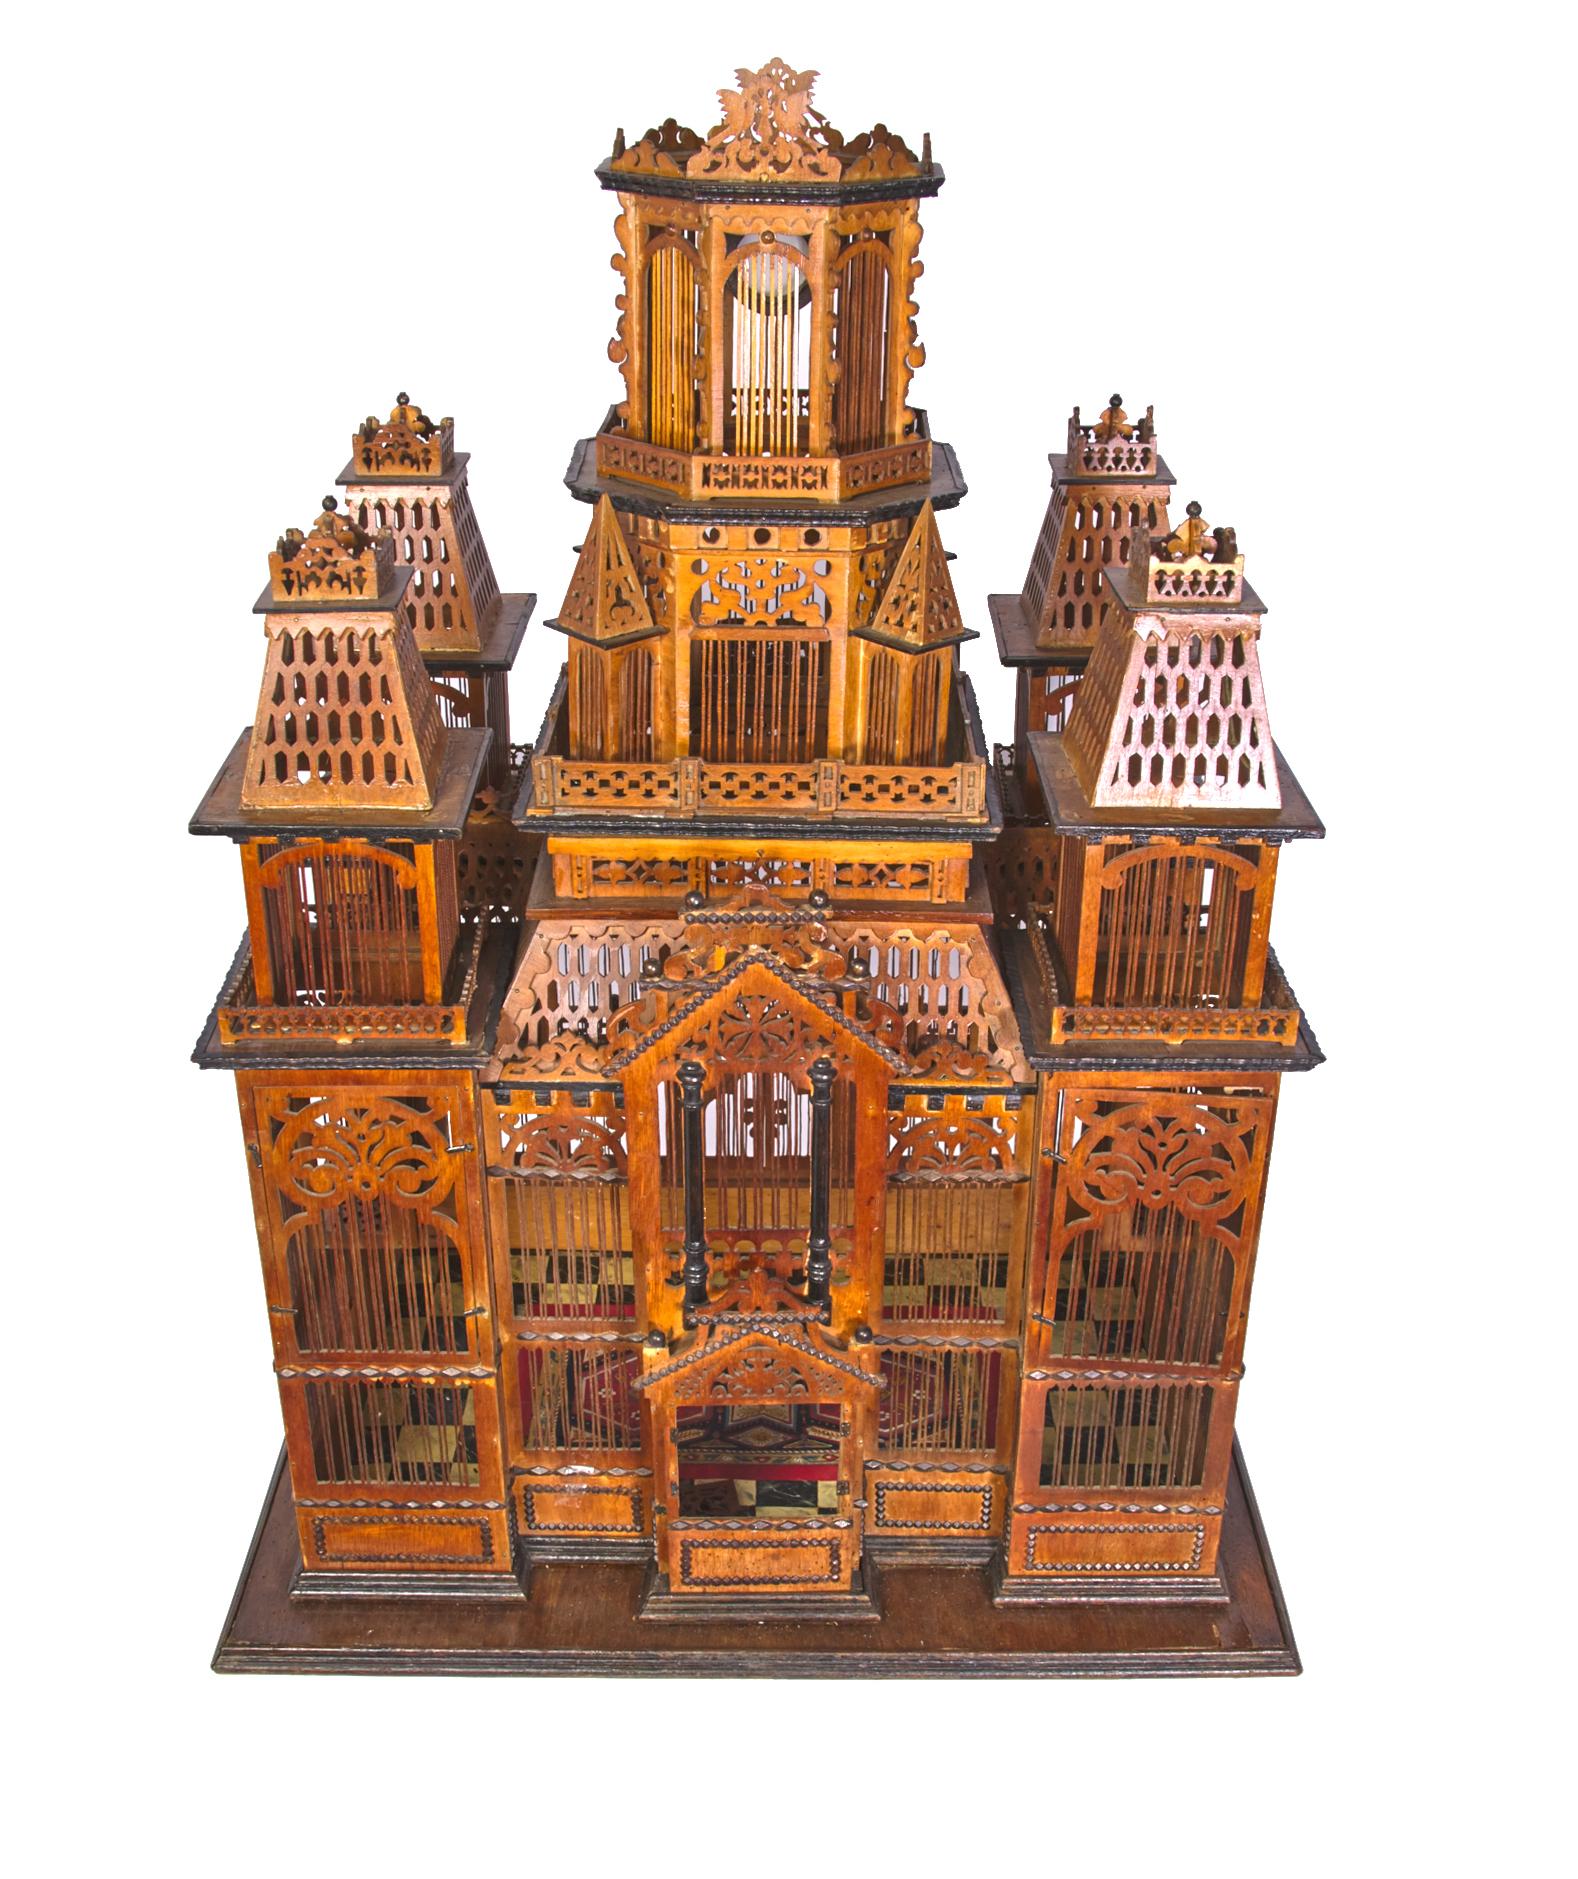 Exceptional Handmade Walnut Wood Birdcage from the Collection of Paul McDonald 1